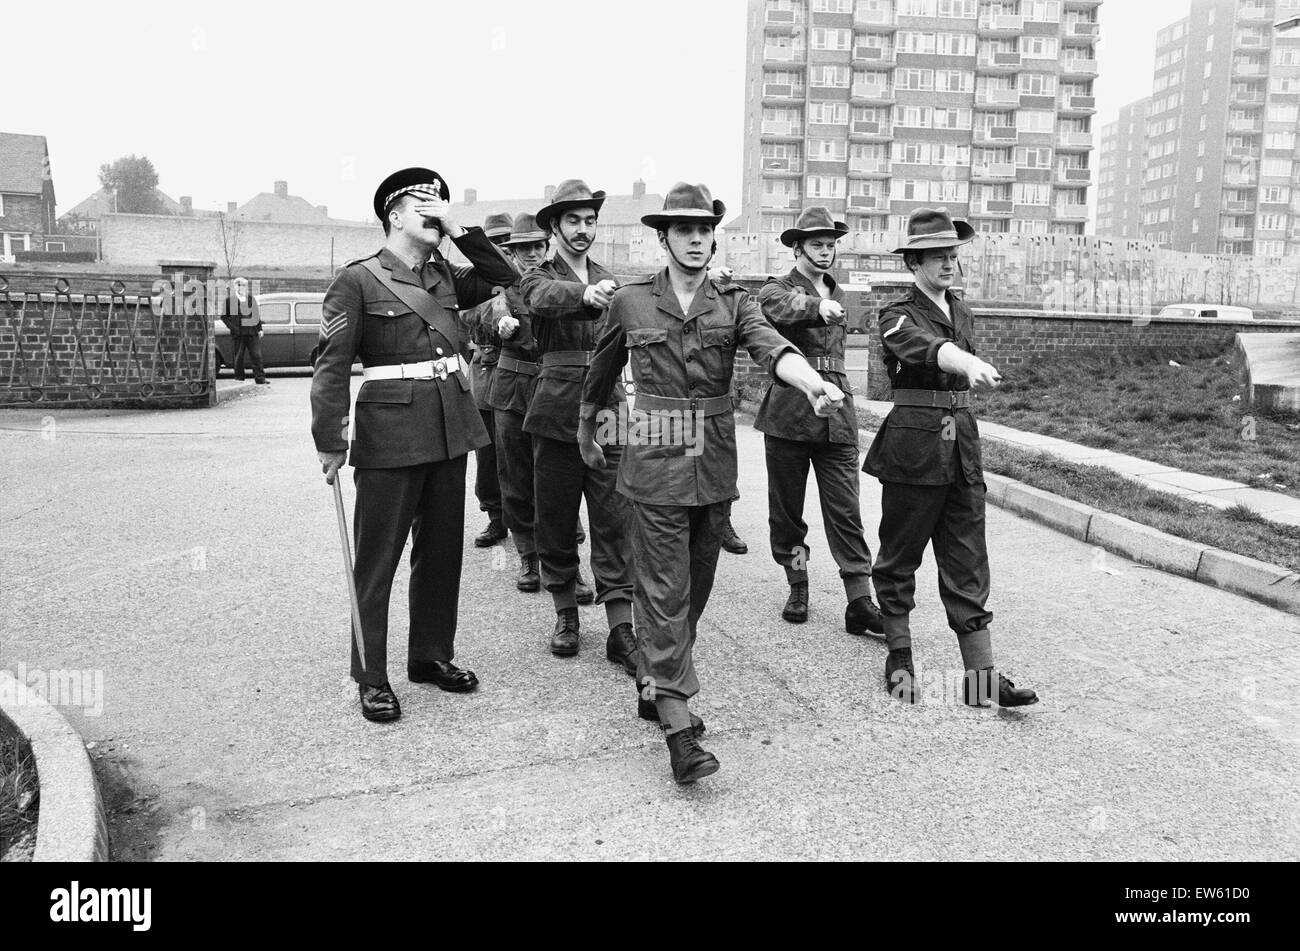 Sergeant Bill Davies of the Scots Guard, drills Brian Miller, William Ellis, Graham Corry, Stephen Berkoff, Warren Clarke, Tony Colegate and William Kendrick, members of the Liverpool Playhouse cast for their roles in 'the Long and the Short and the Tall Stock Photo